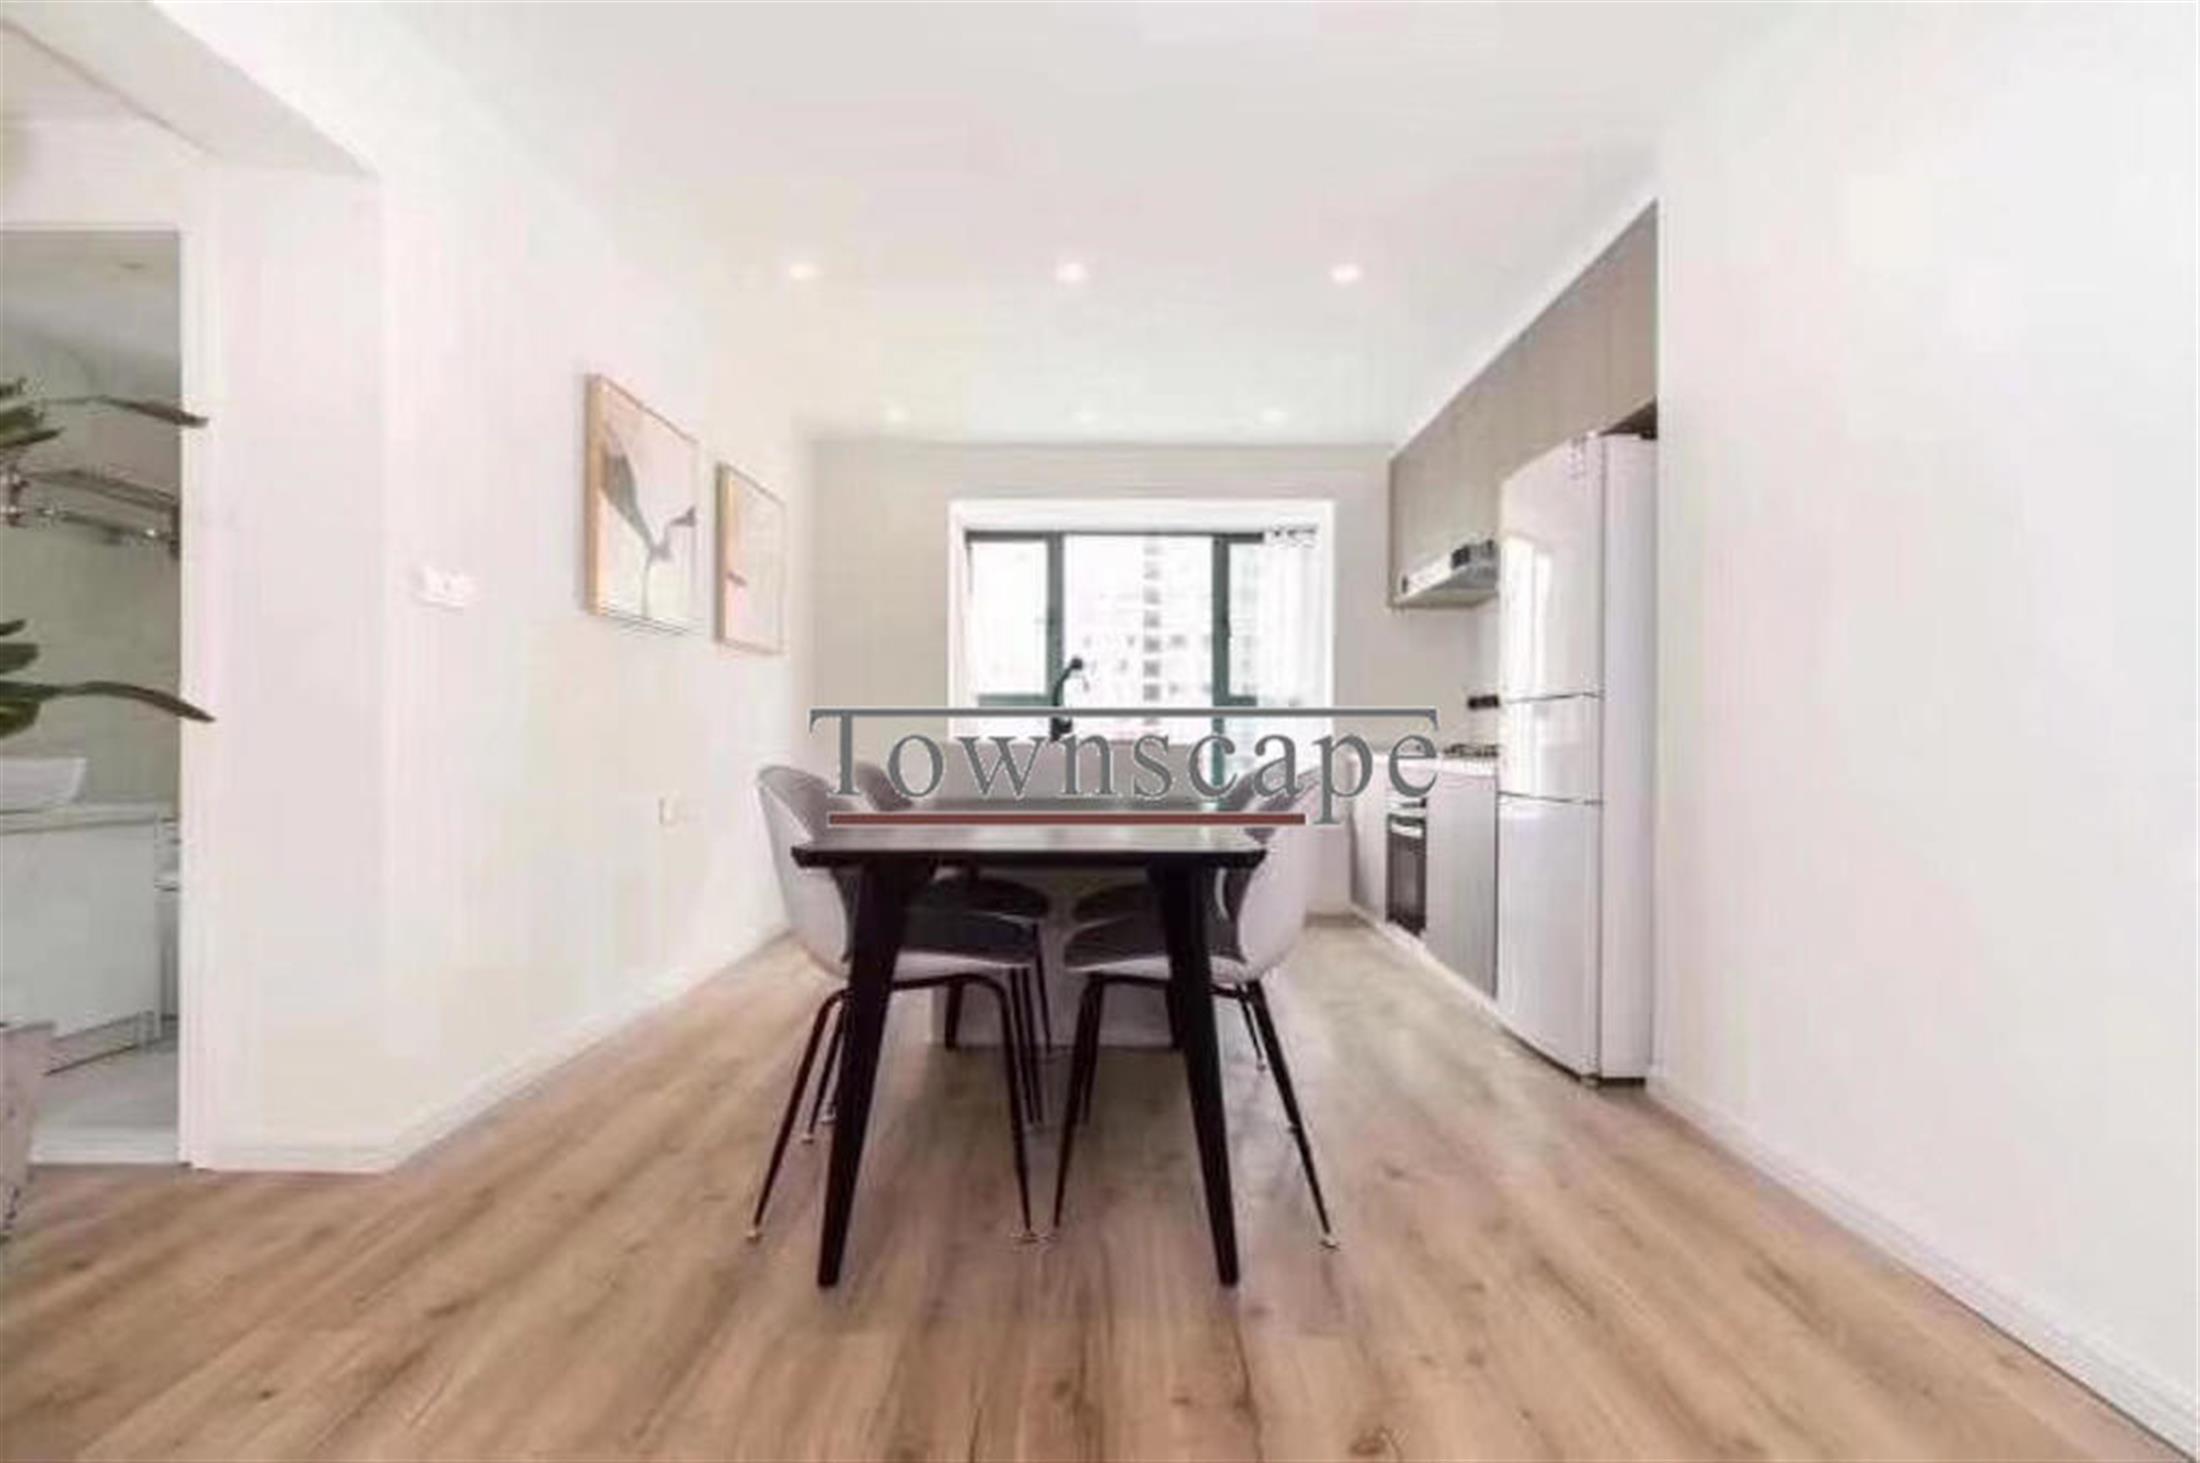 Open Dining Area Spacious Renovated FFC Courtyards Apartment w Great Views for Rent in Shanghai